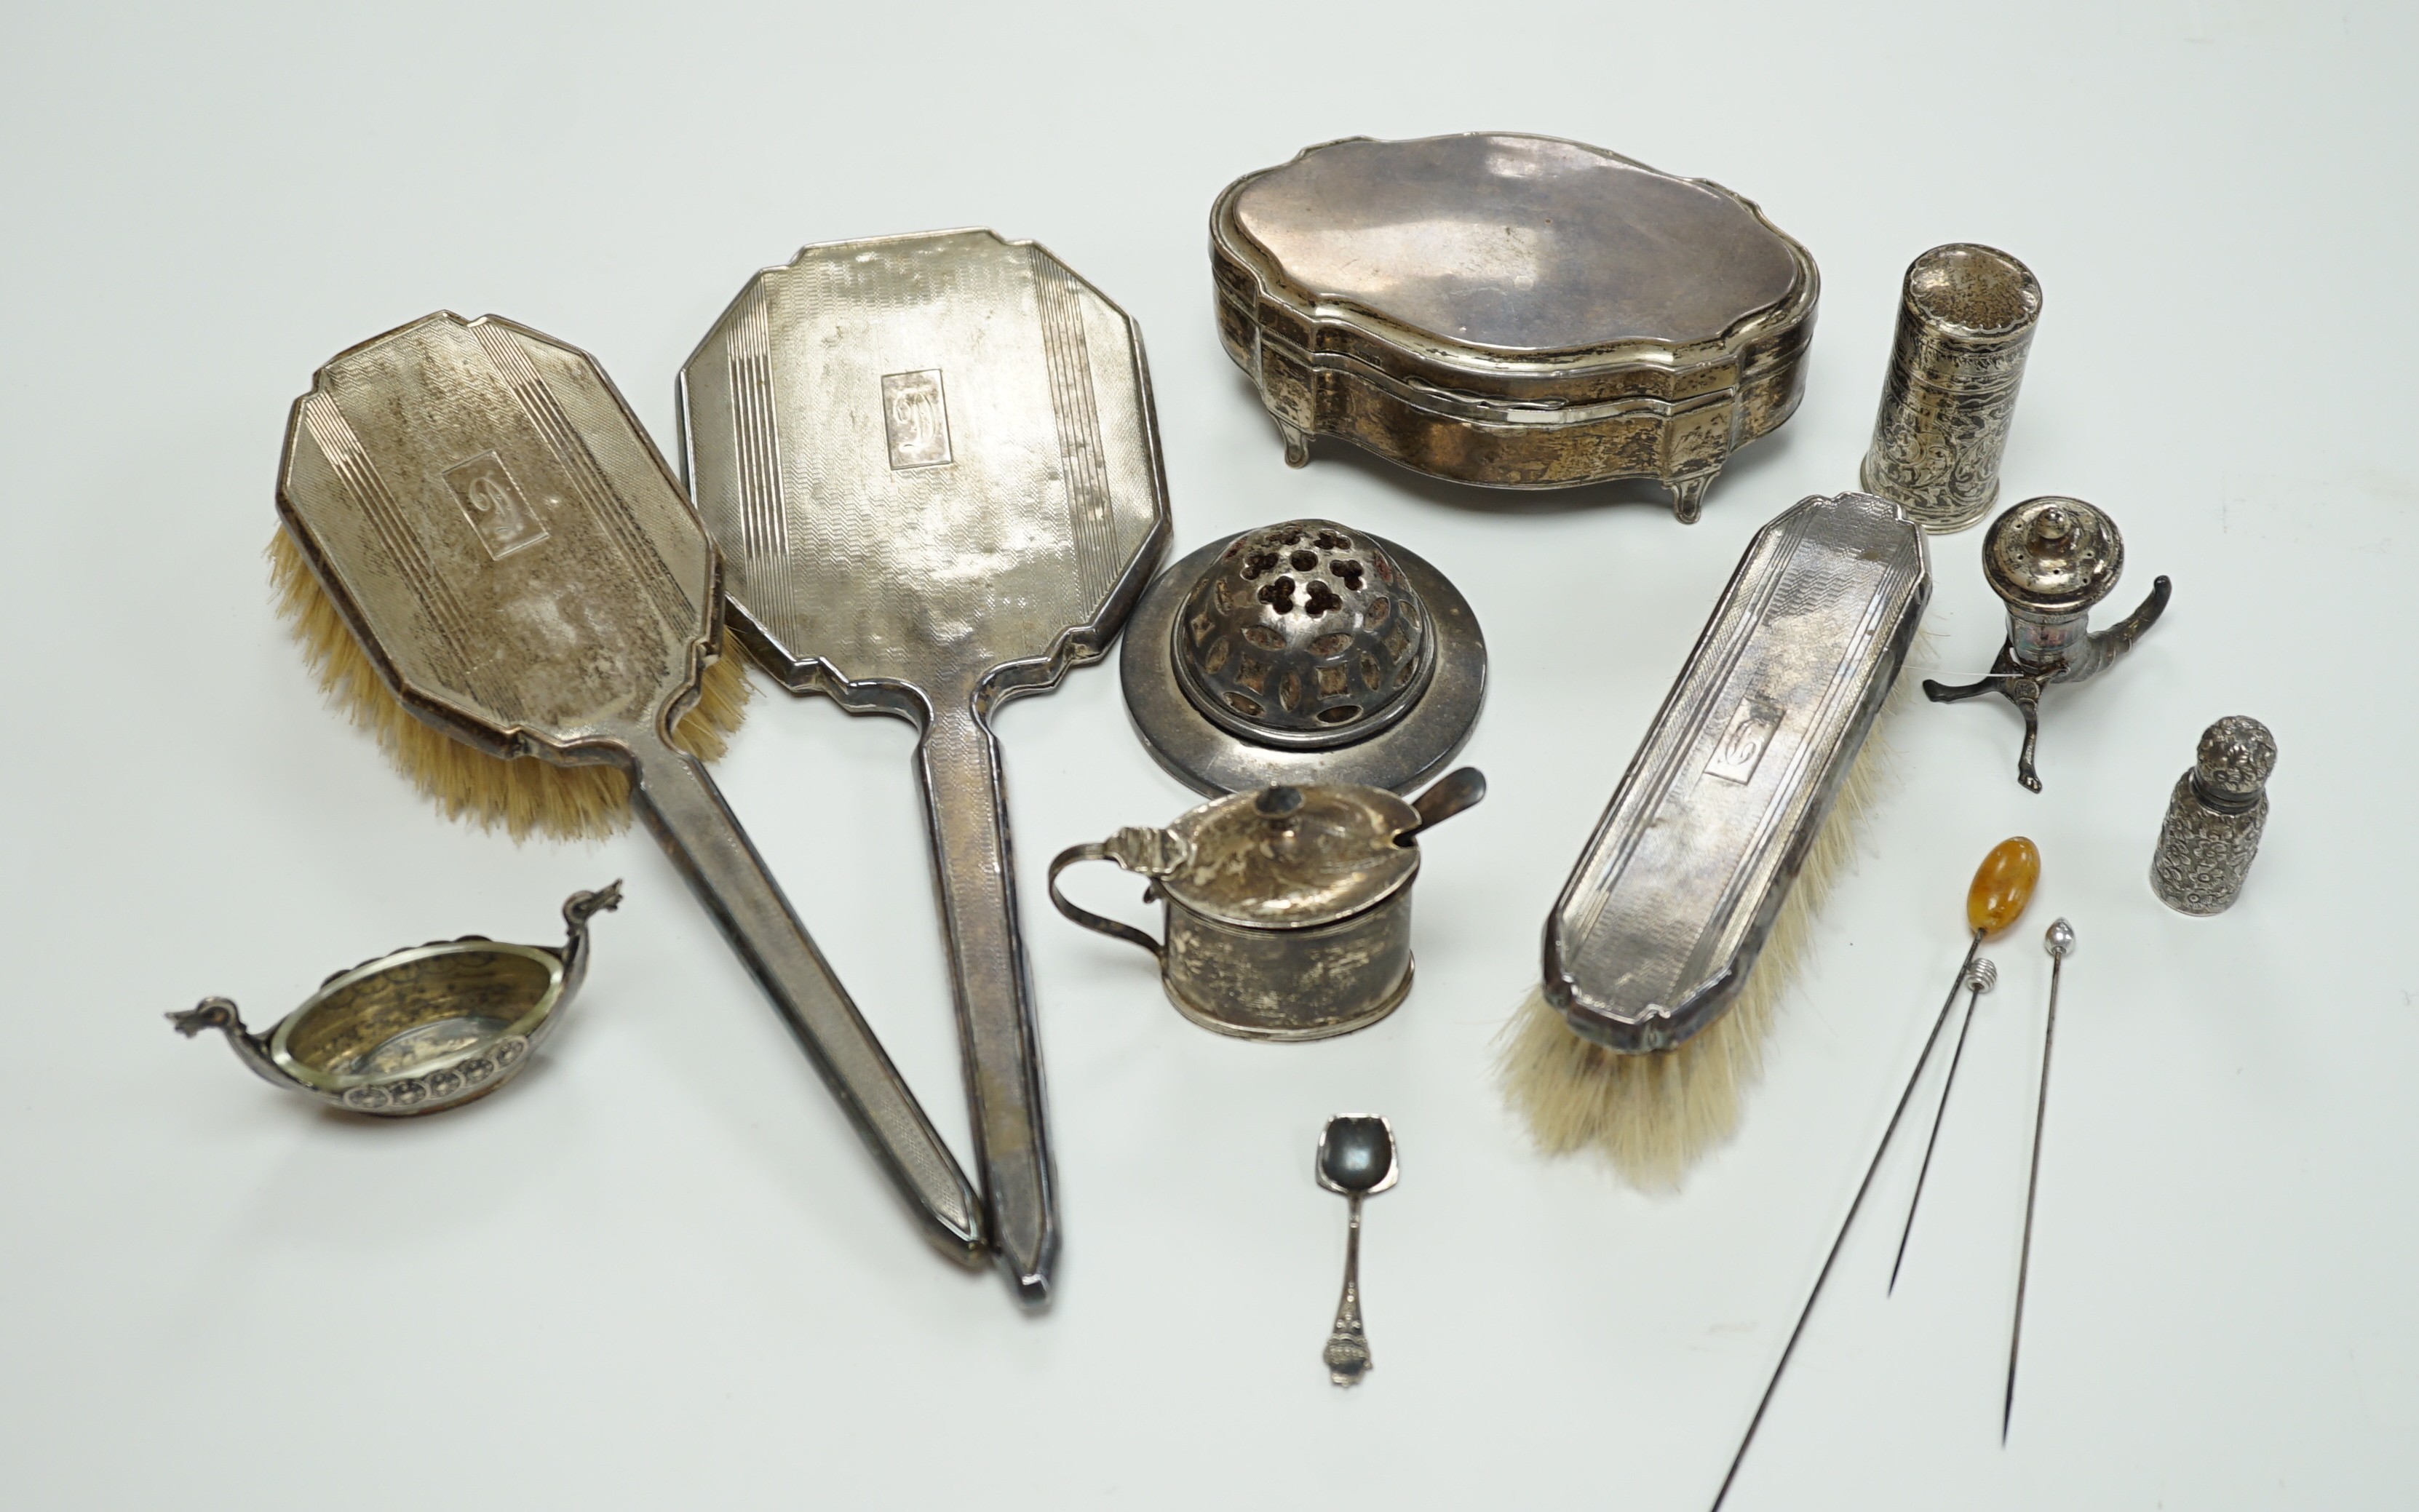 A George V silver mounted trinket box, Elkington & Co, Birmingham, 1918, 13.1cm, a silver mustard pot, two Scandinavian 925 condiments, two silver mounted scent bottles, hatpins and hatpin stand and a silver mounted thre